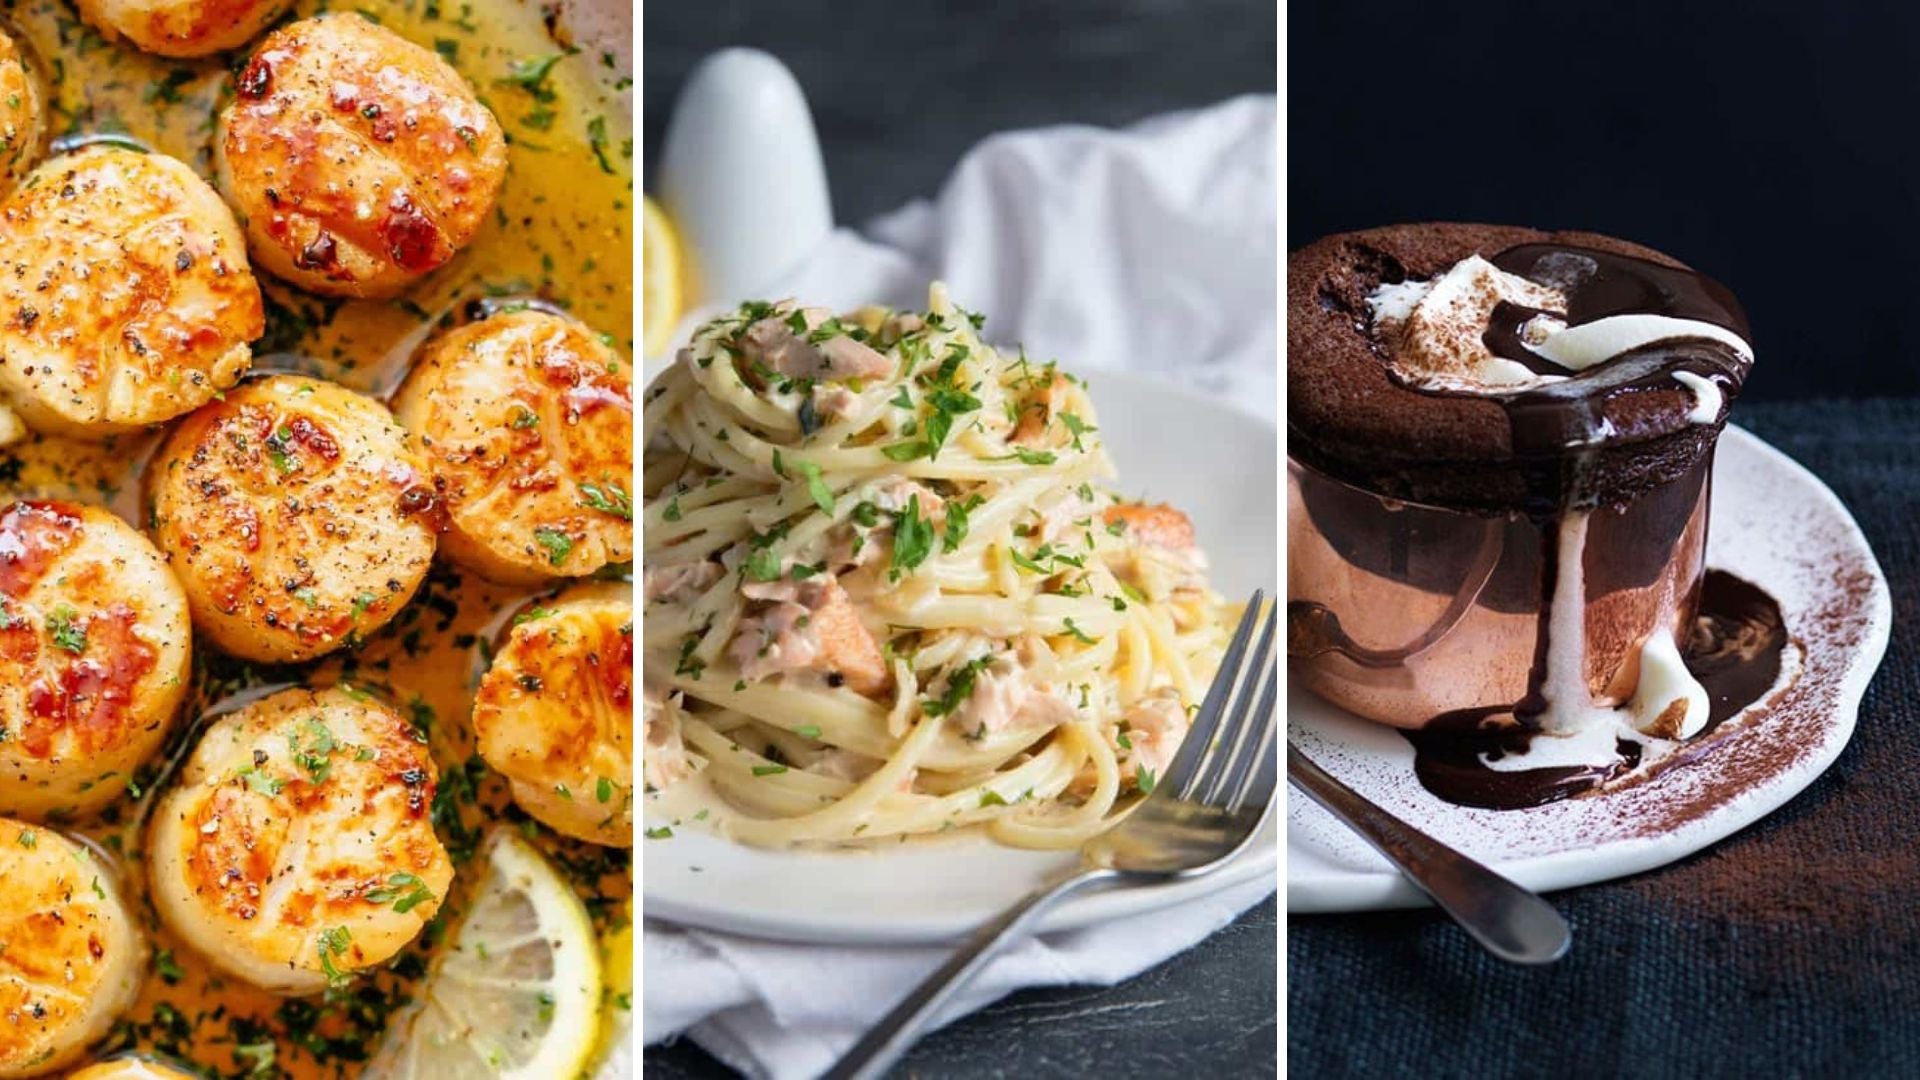 Seafood 3 course meal recipes